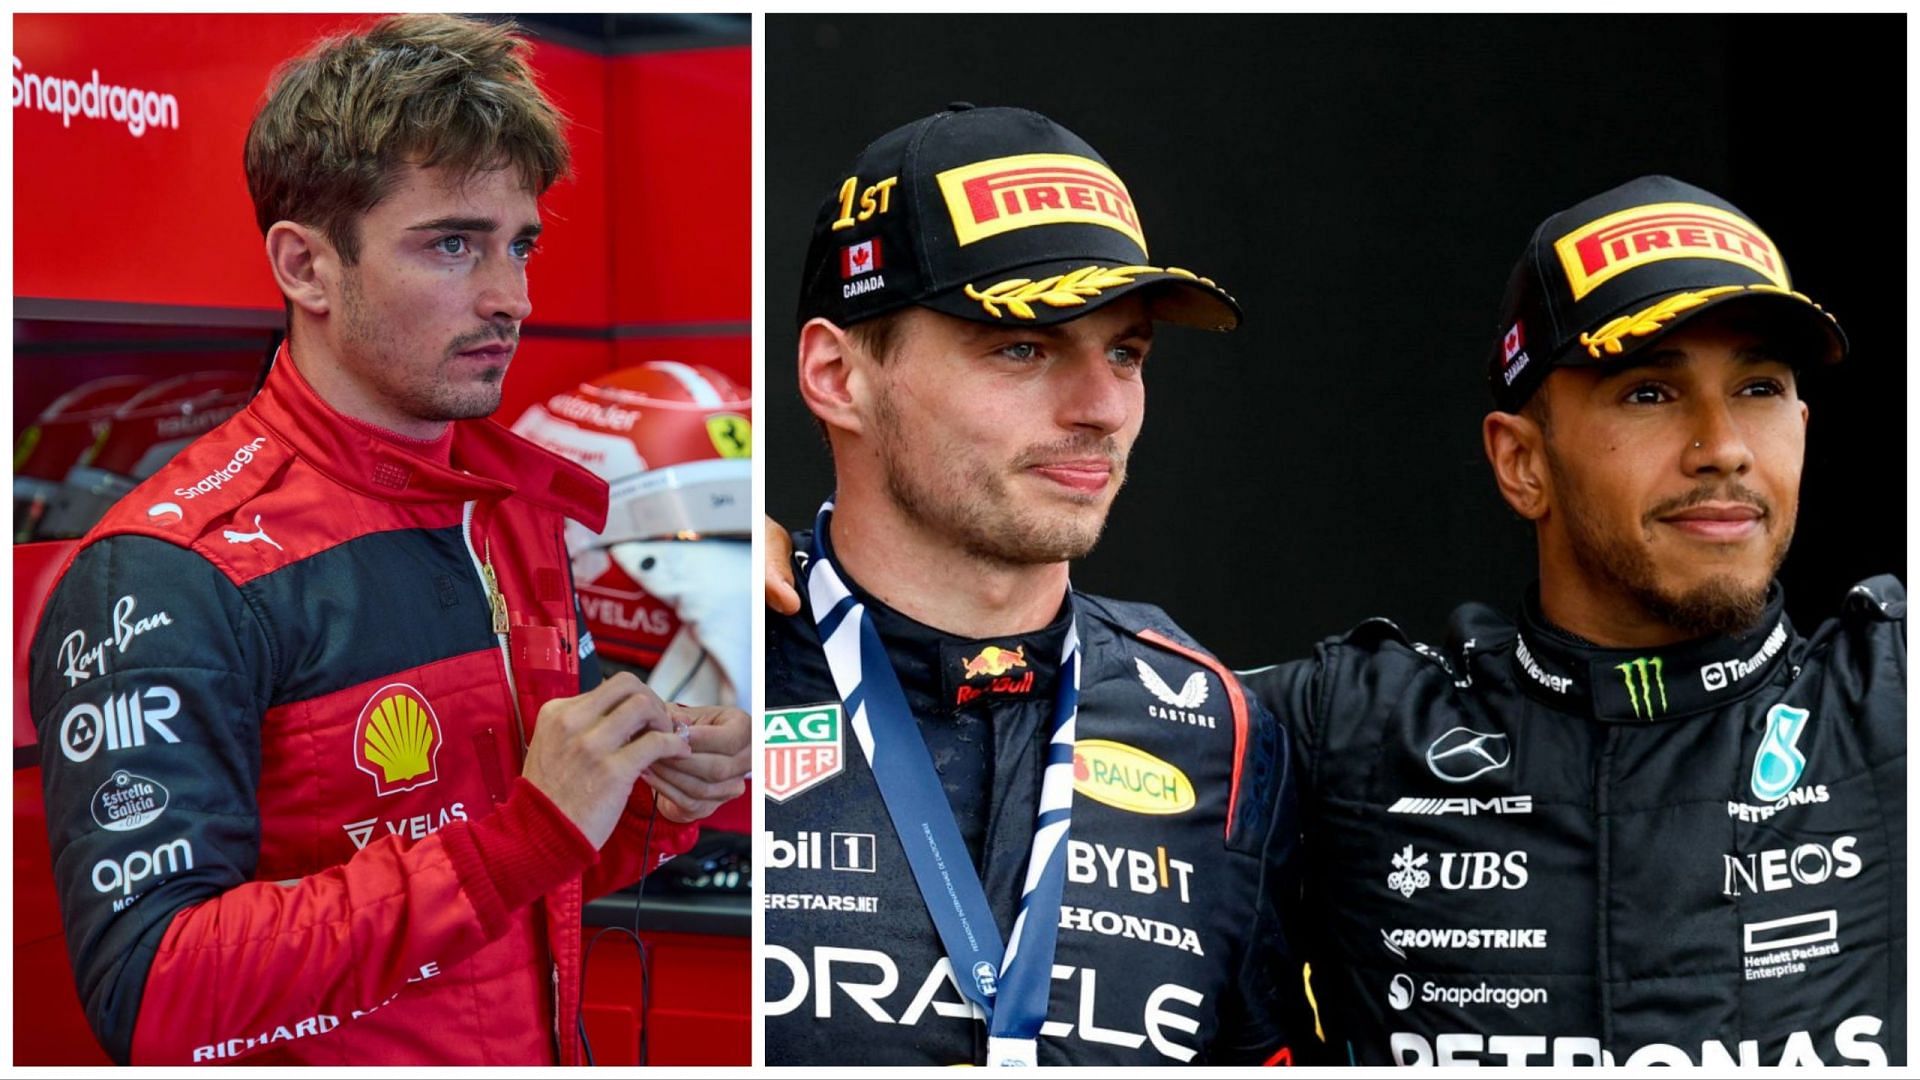 Charles Leclerc opens up about facing Lewis Hamilton and Max Verstappen on the grid